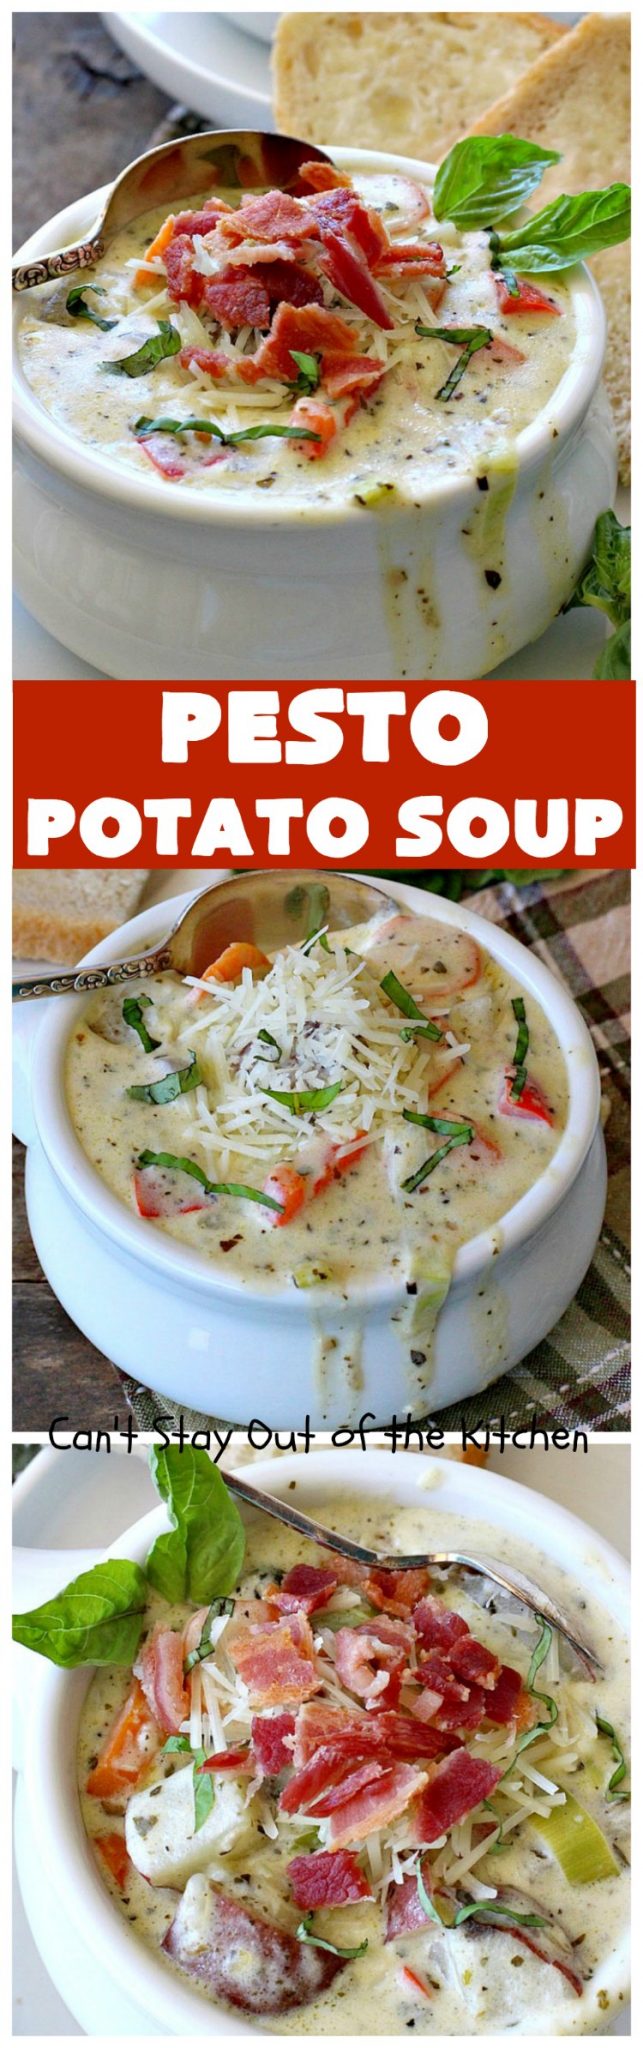 Pesto Potato Soup – Can't Stay Out of the Kitchen